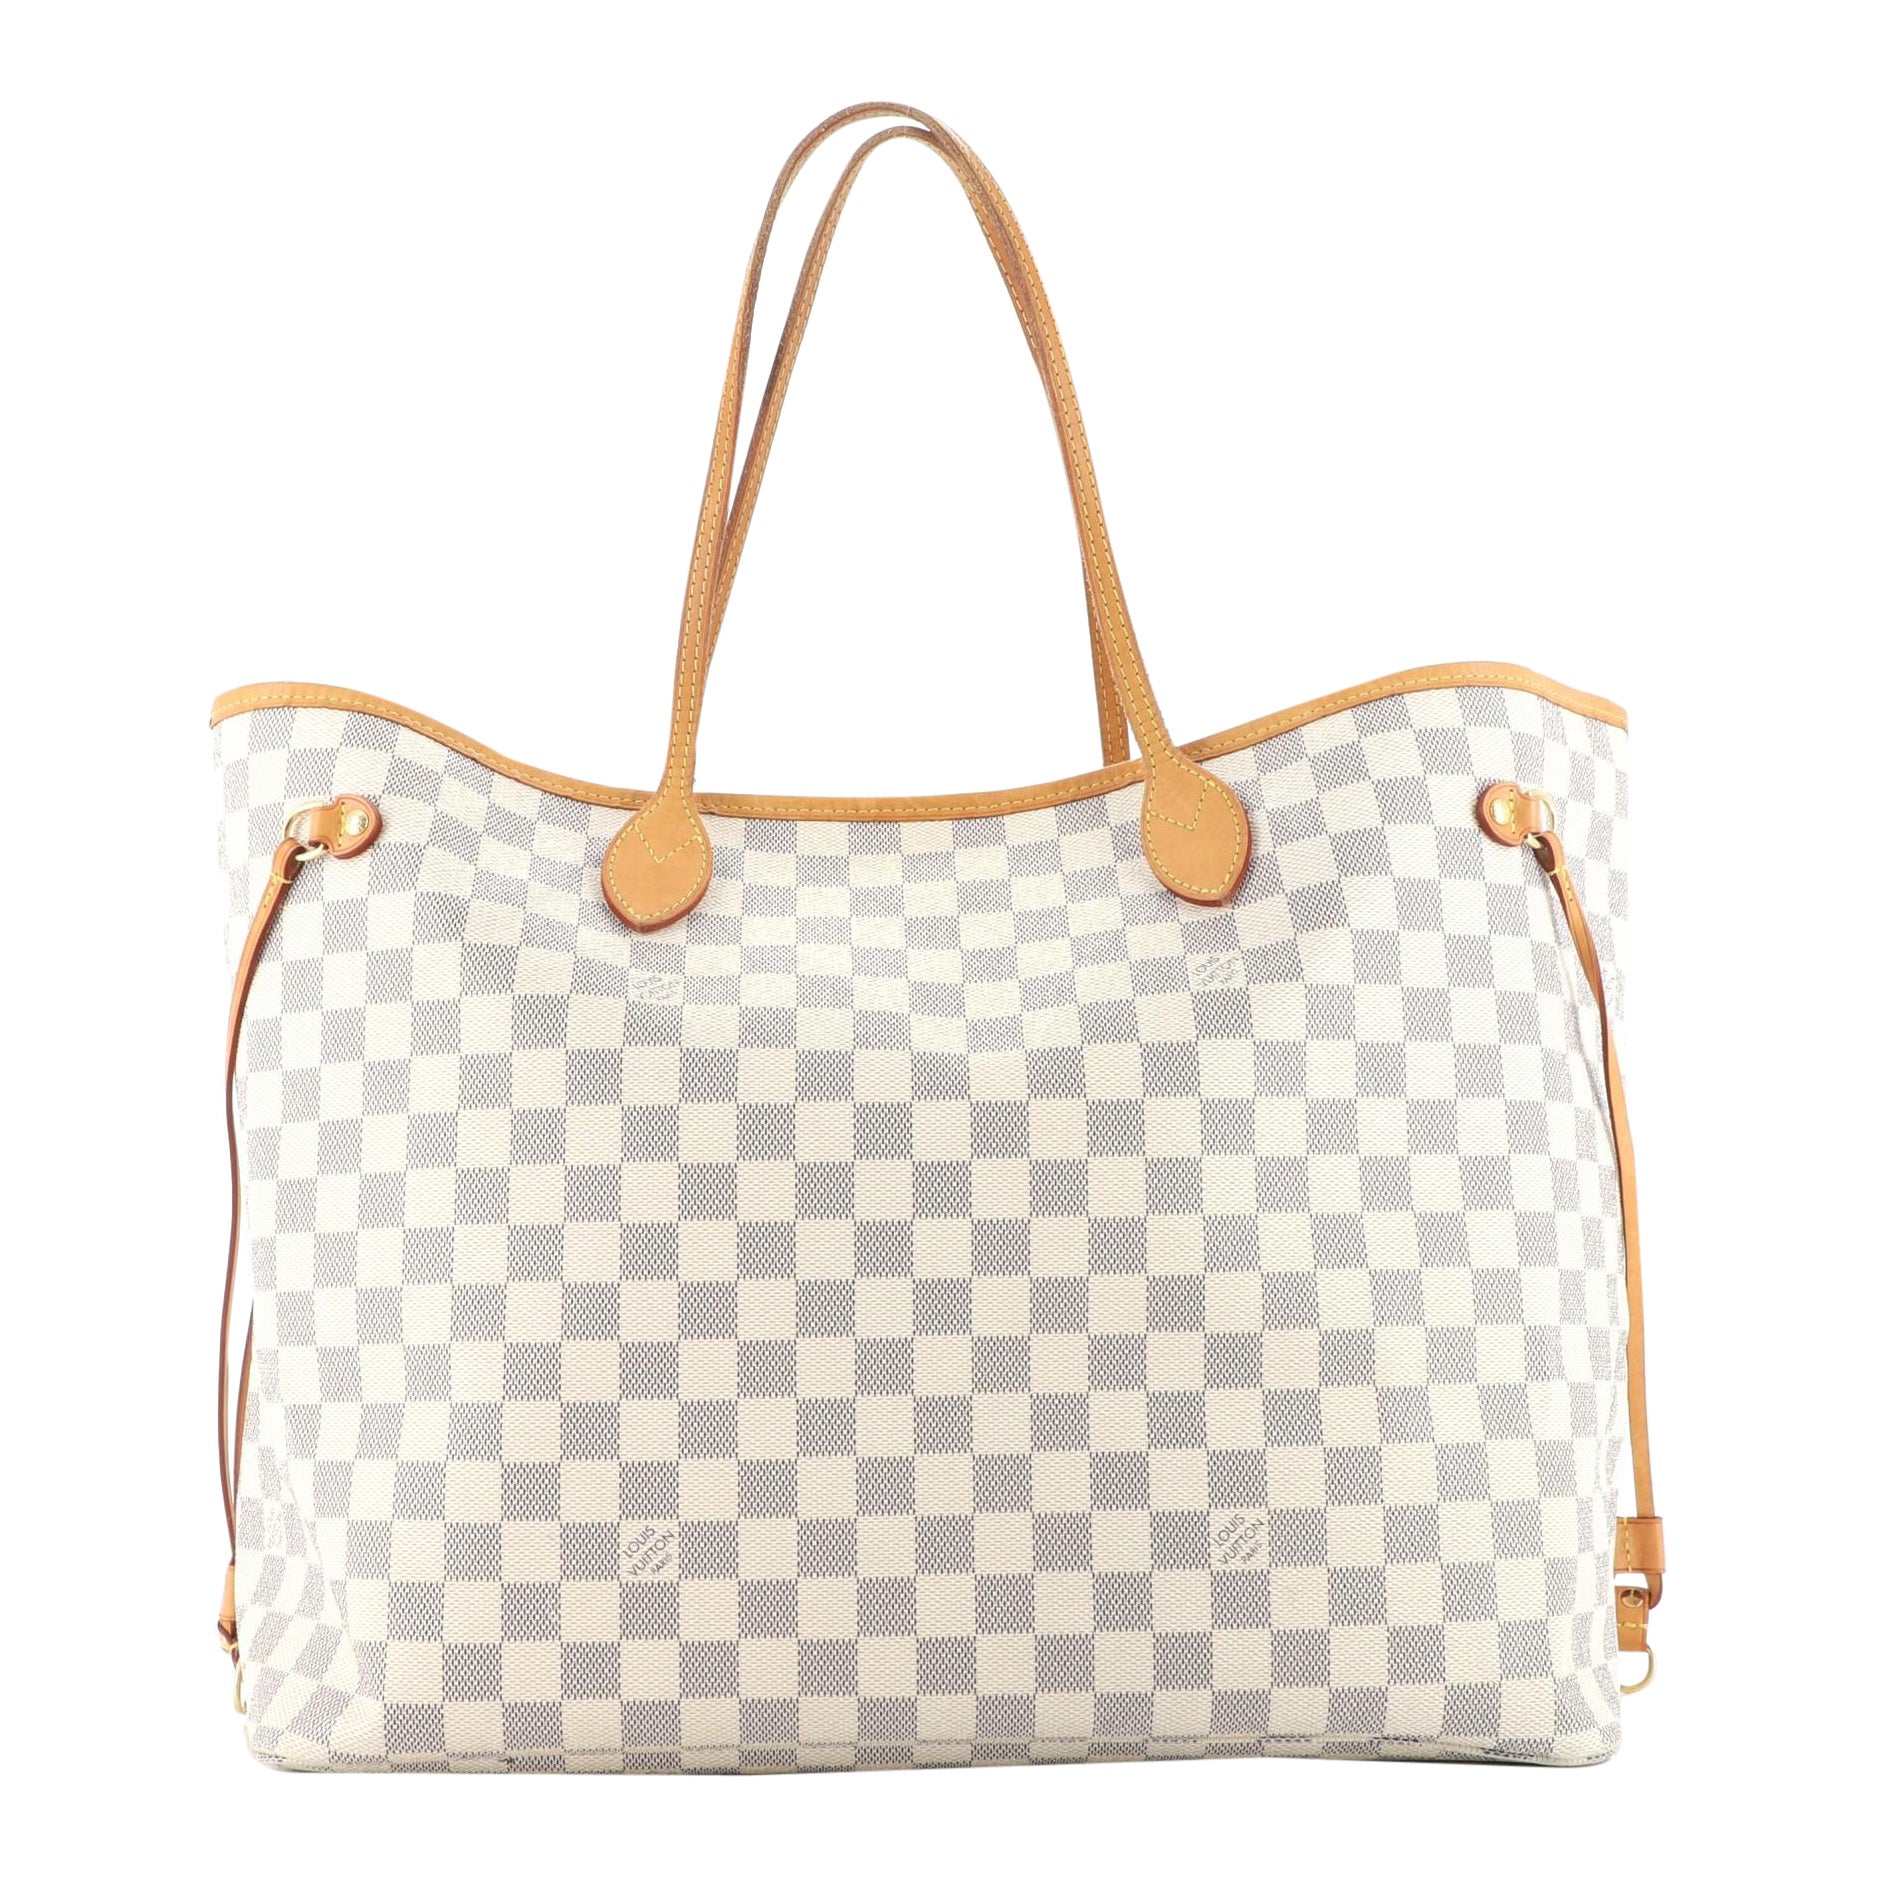  Louis Vuitton Neverfull NM Tote Damier GM